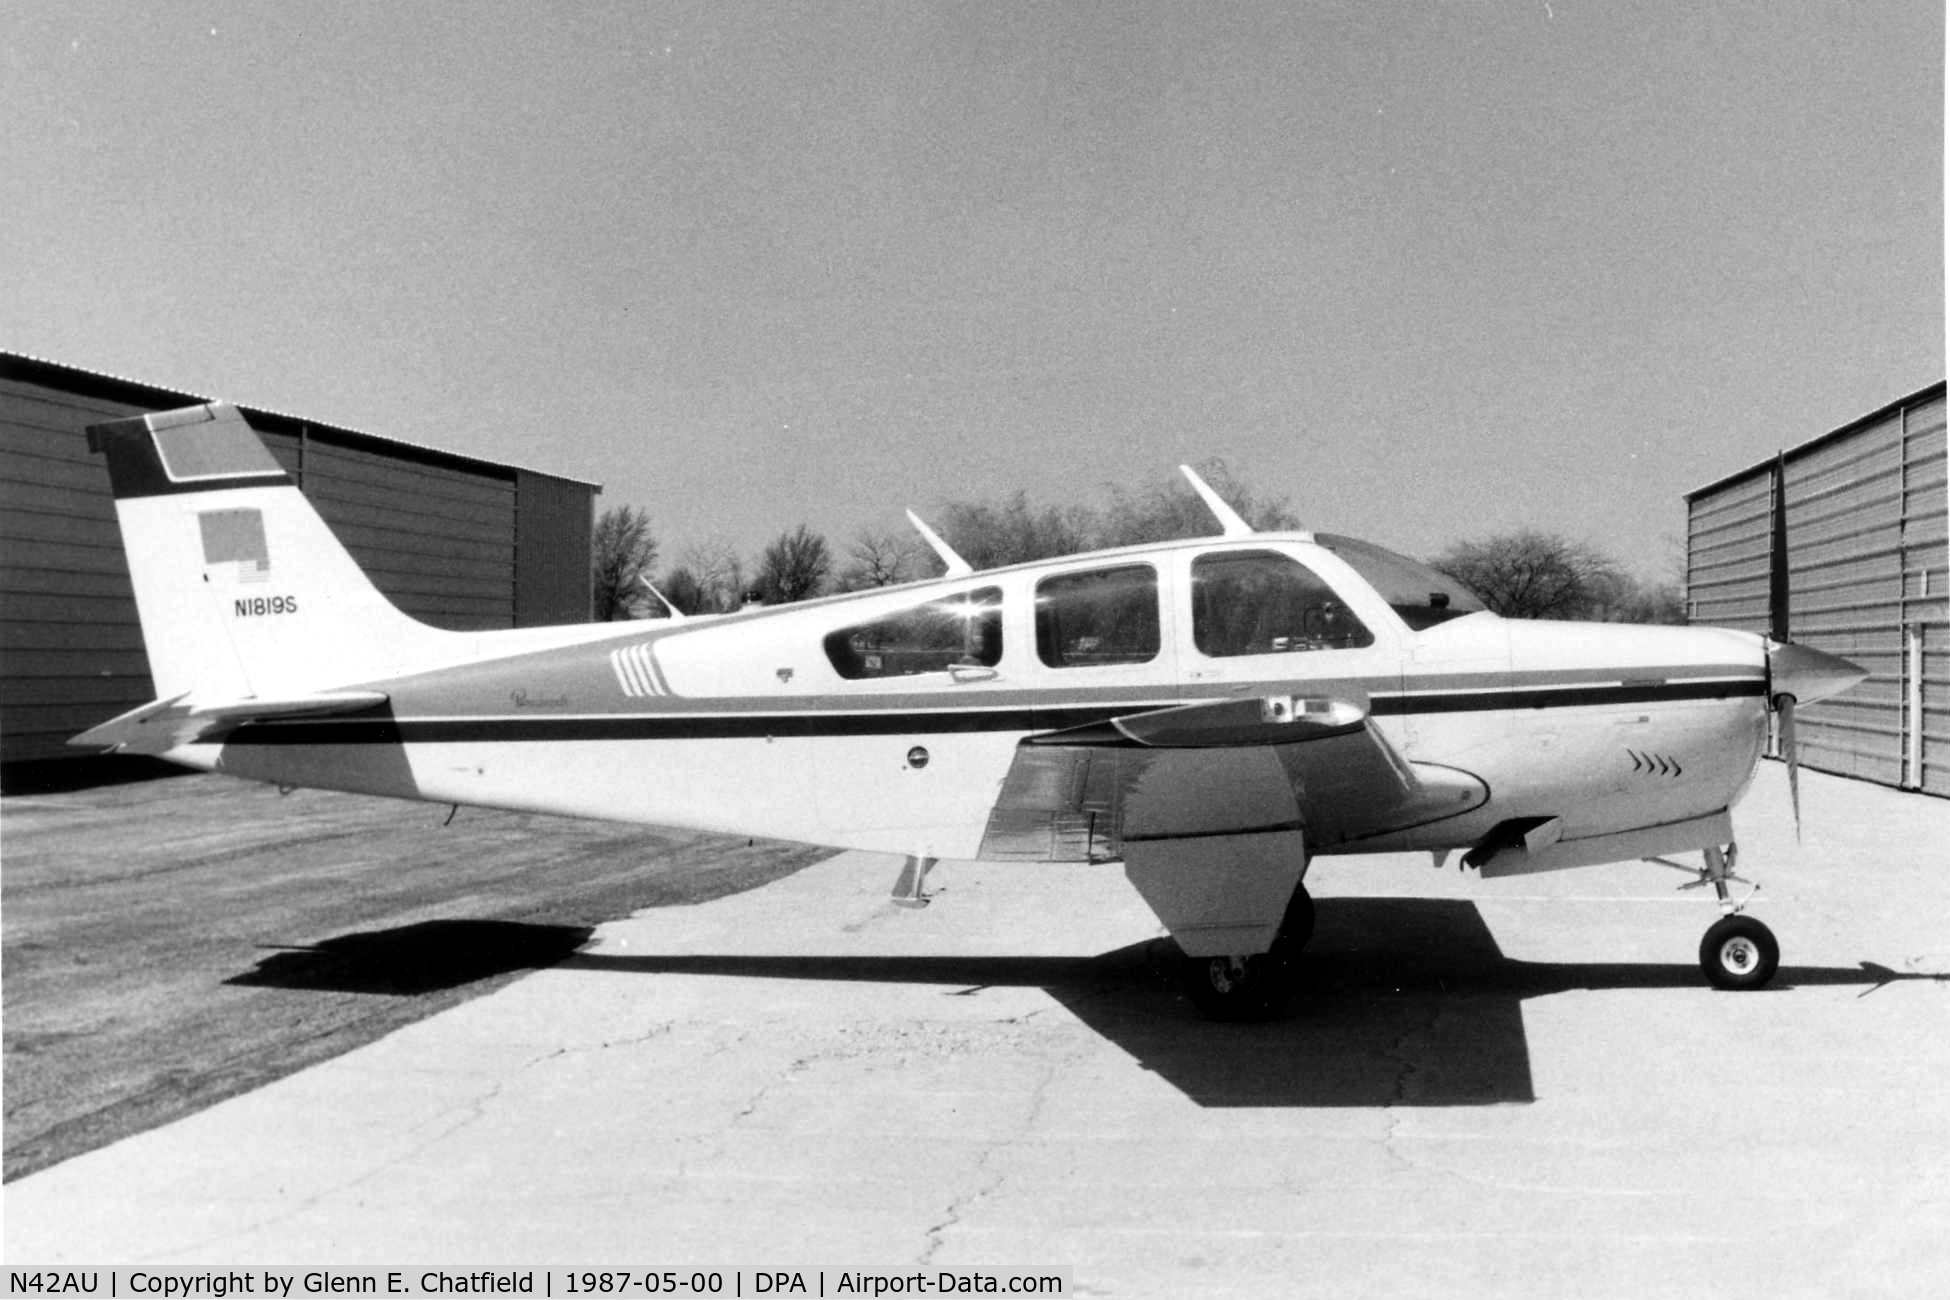 N42AU, 1982 Beech F33A Bonanza C/N CE-1010, Photo taken for aircraft recognition training when flown by David Nelson as N1819S.